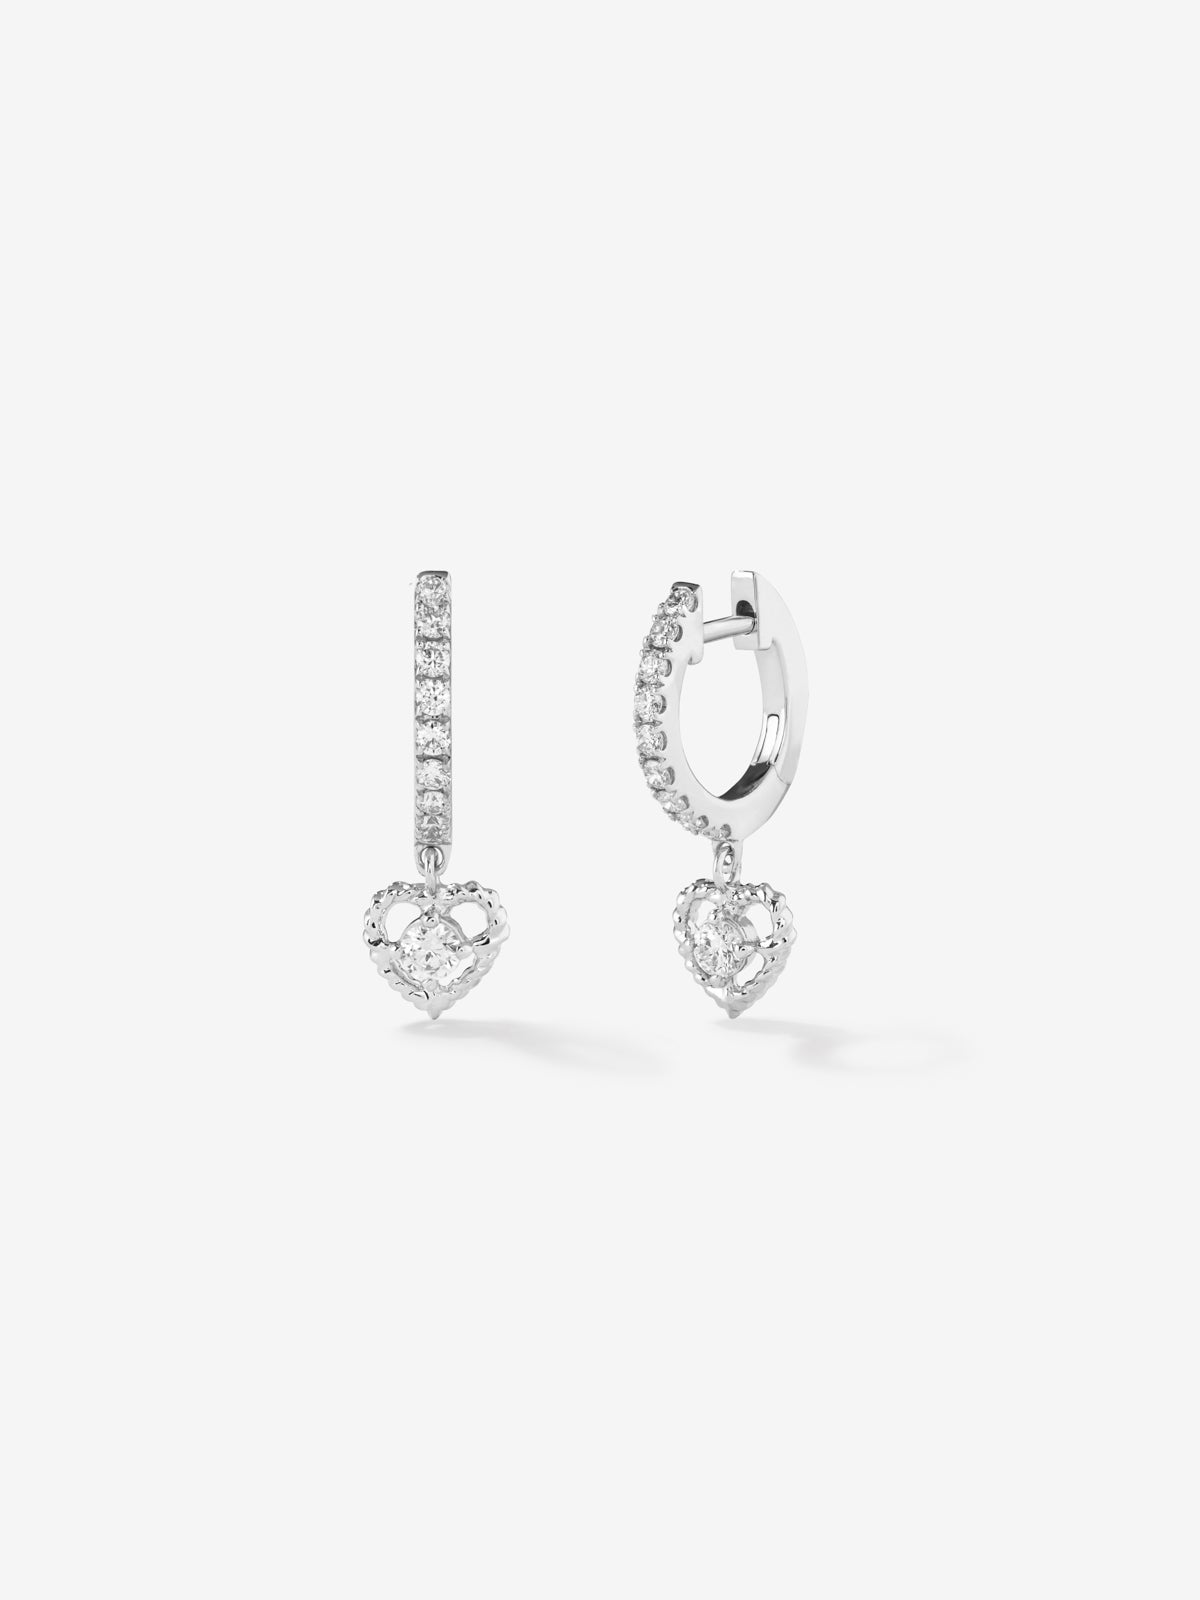 18K white gold earrings with 20 brilliant-cut diamonds with a total of 0.33 cts